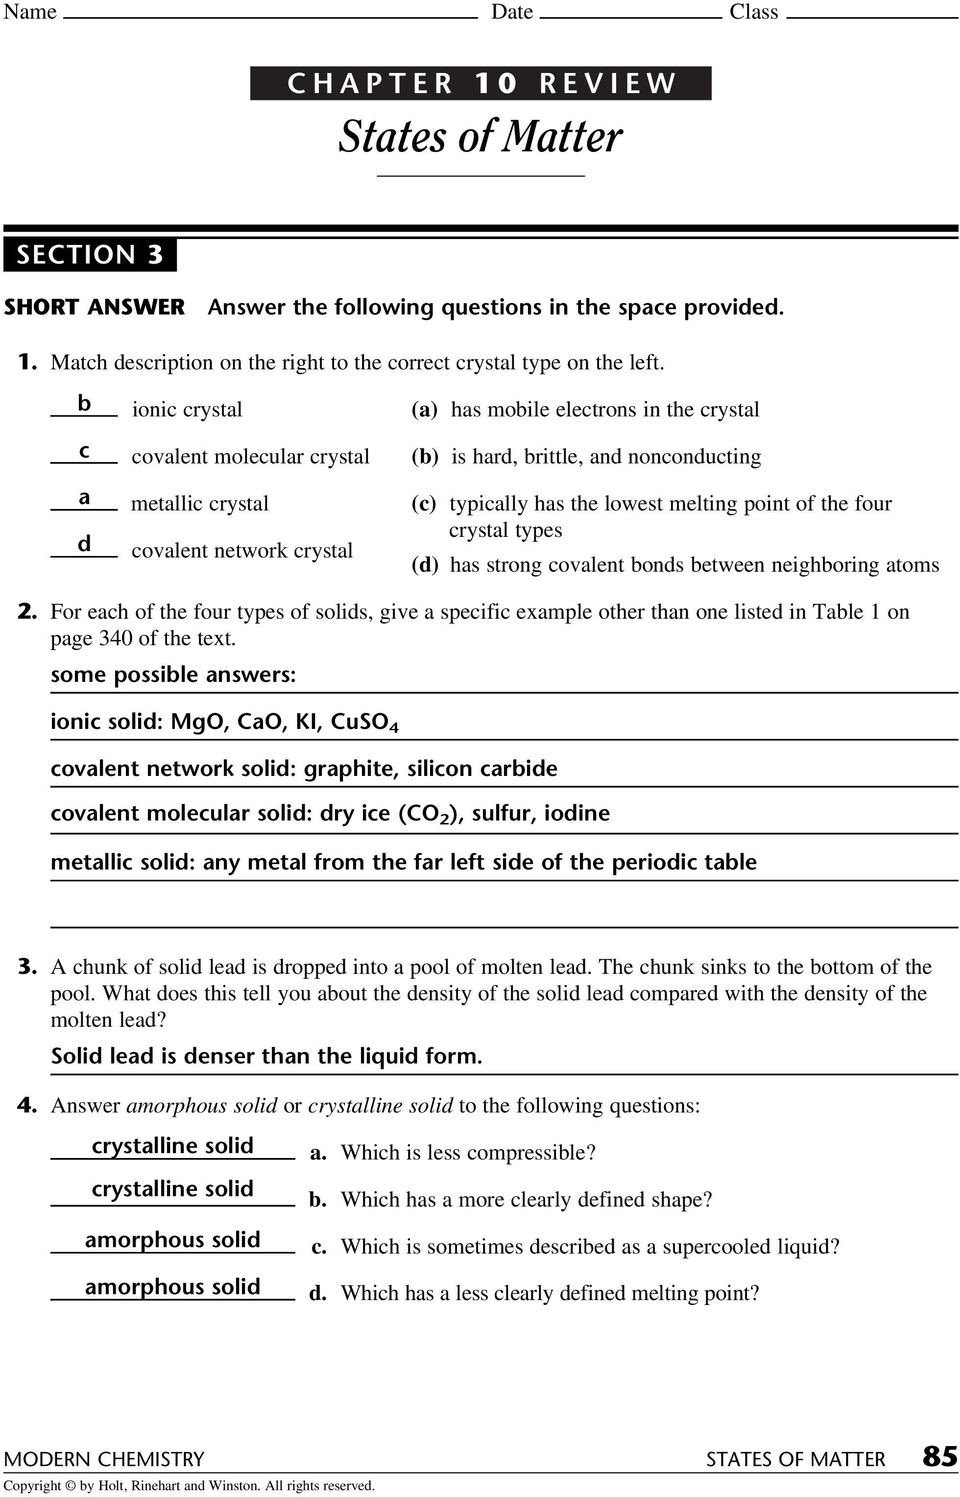 States Of Matter Worksheet Answers States Of Matter Chapter 10 Review Section 1 Name Date